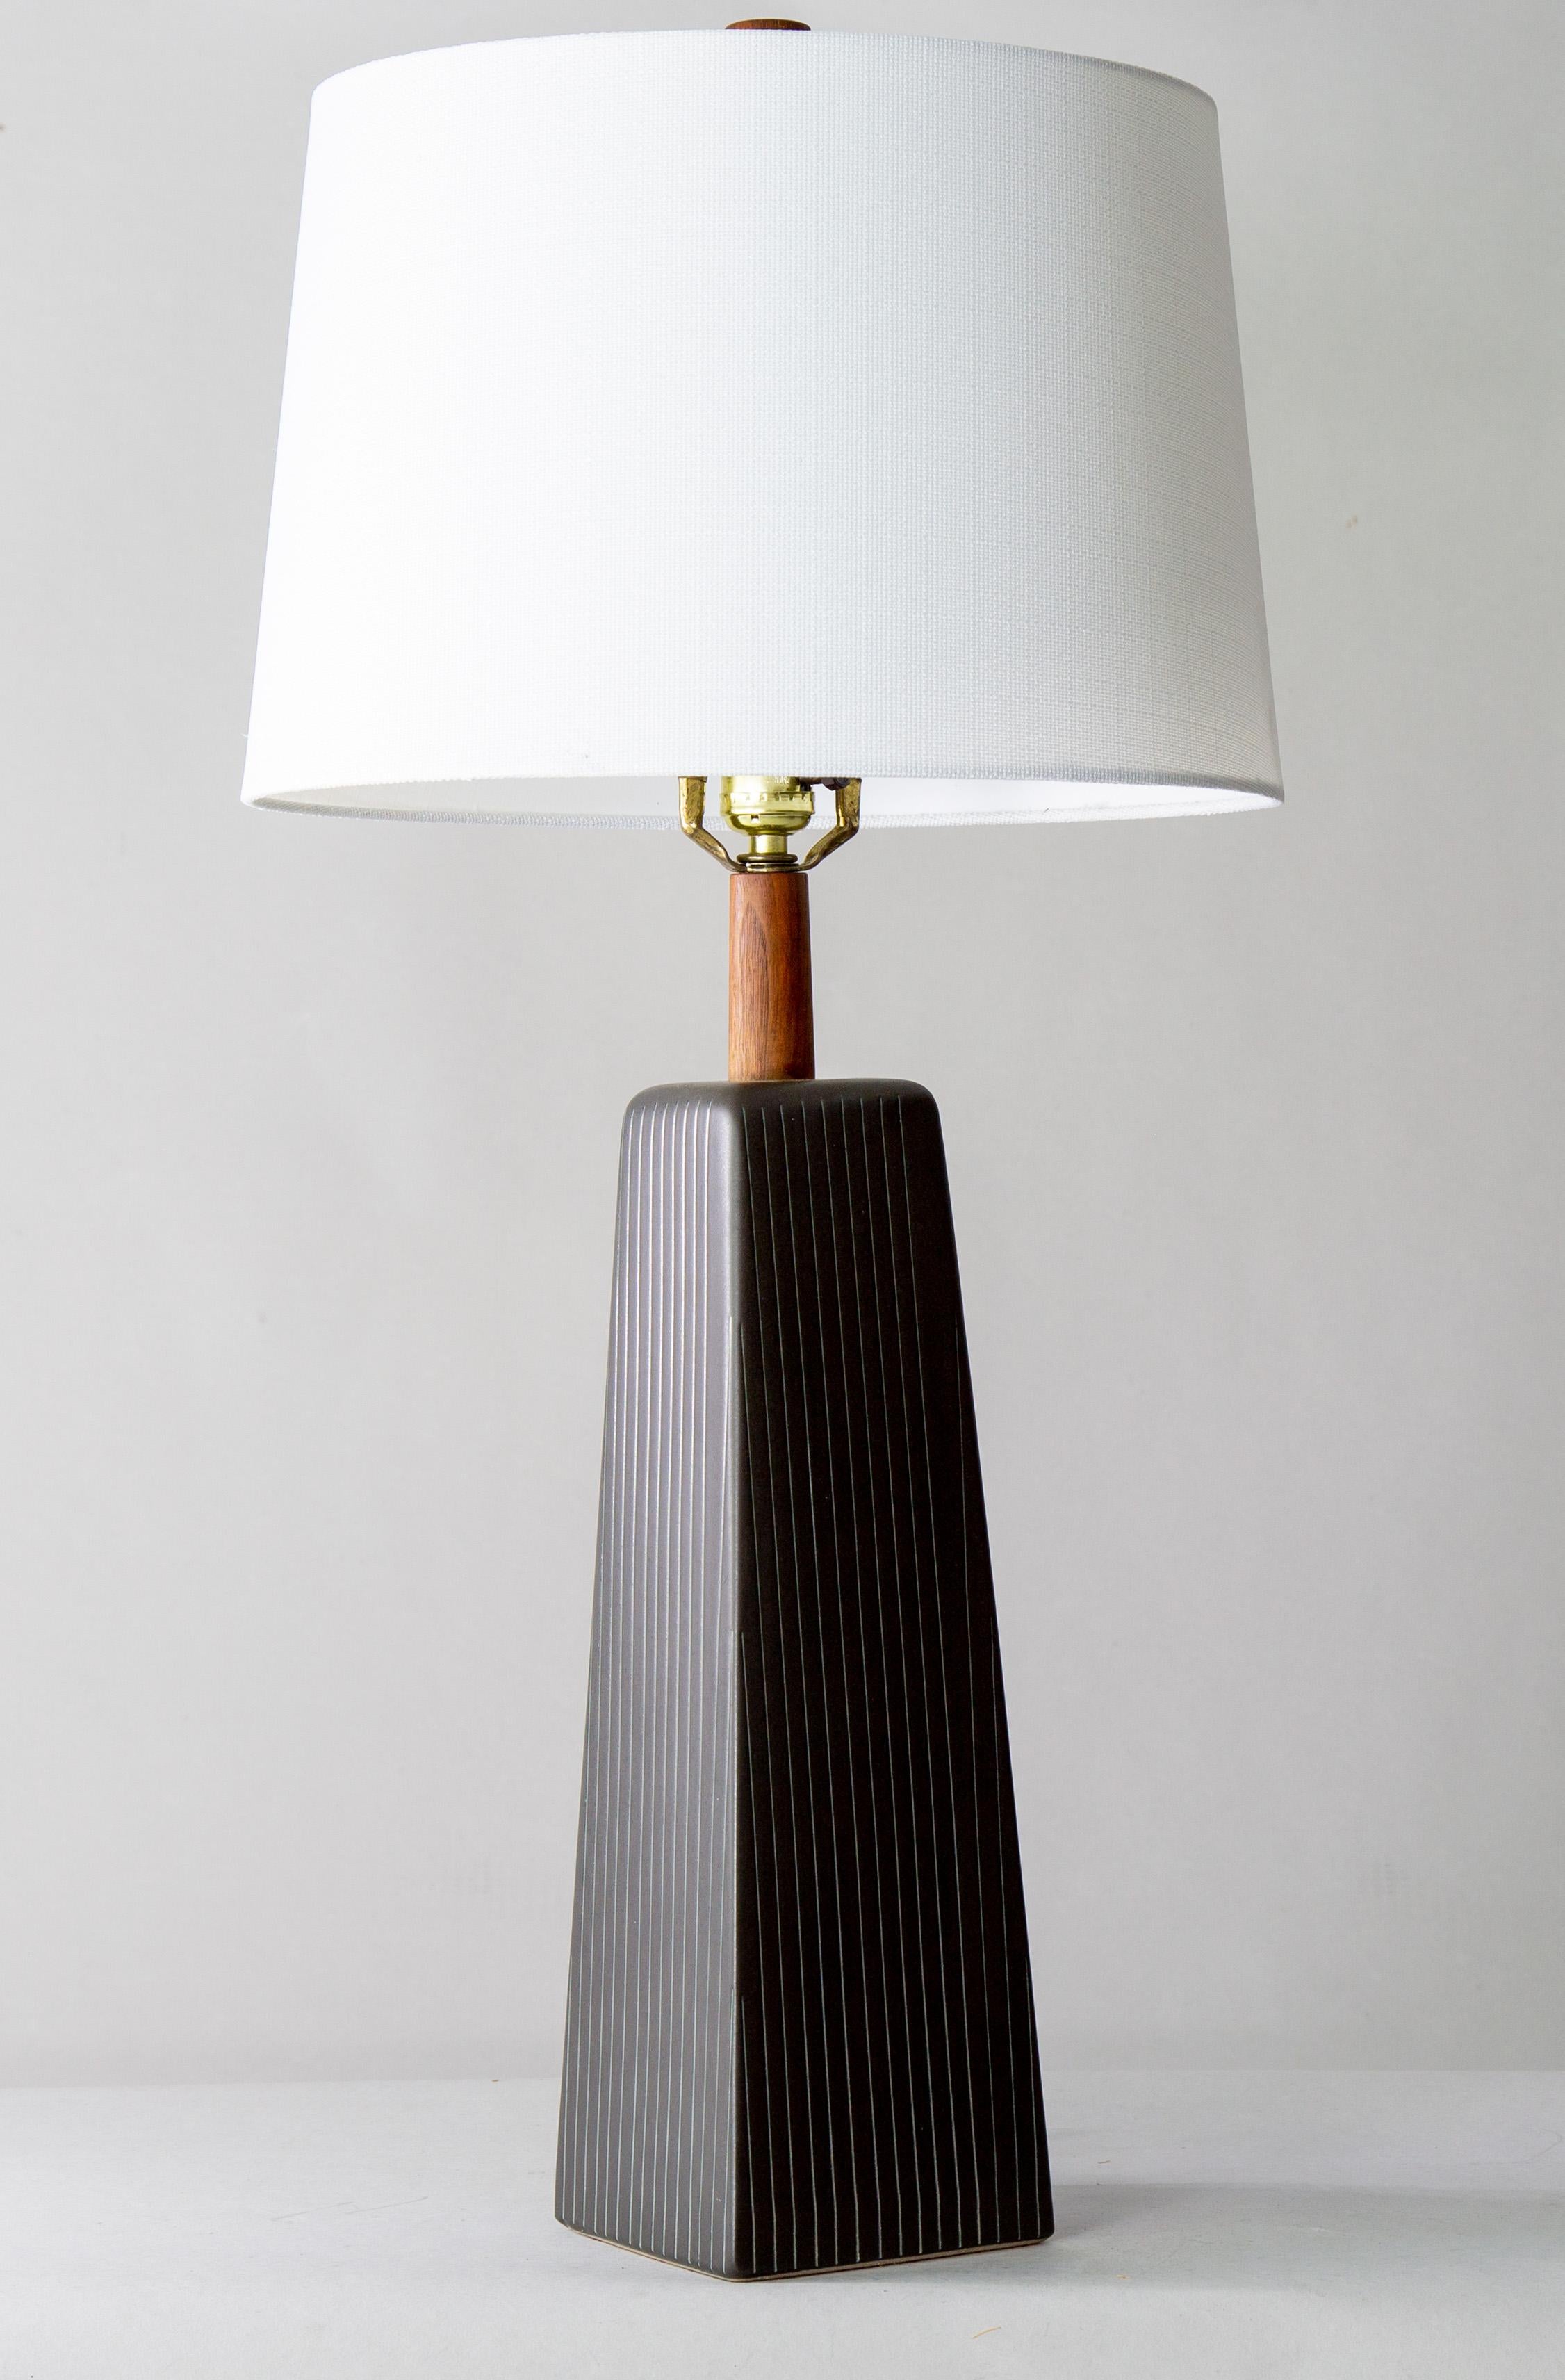 A highly collectable 1960s lamp designed by Jane and Gordon Martz of Marshall Studios in Veedersburg Indiana. These lamps are highly sought after and are showing up in designs all over the world. Blending sophistication and modern these lamps are